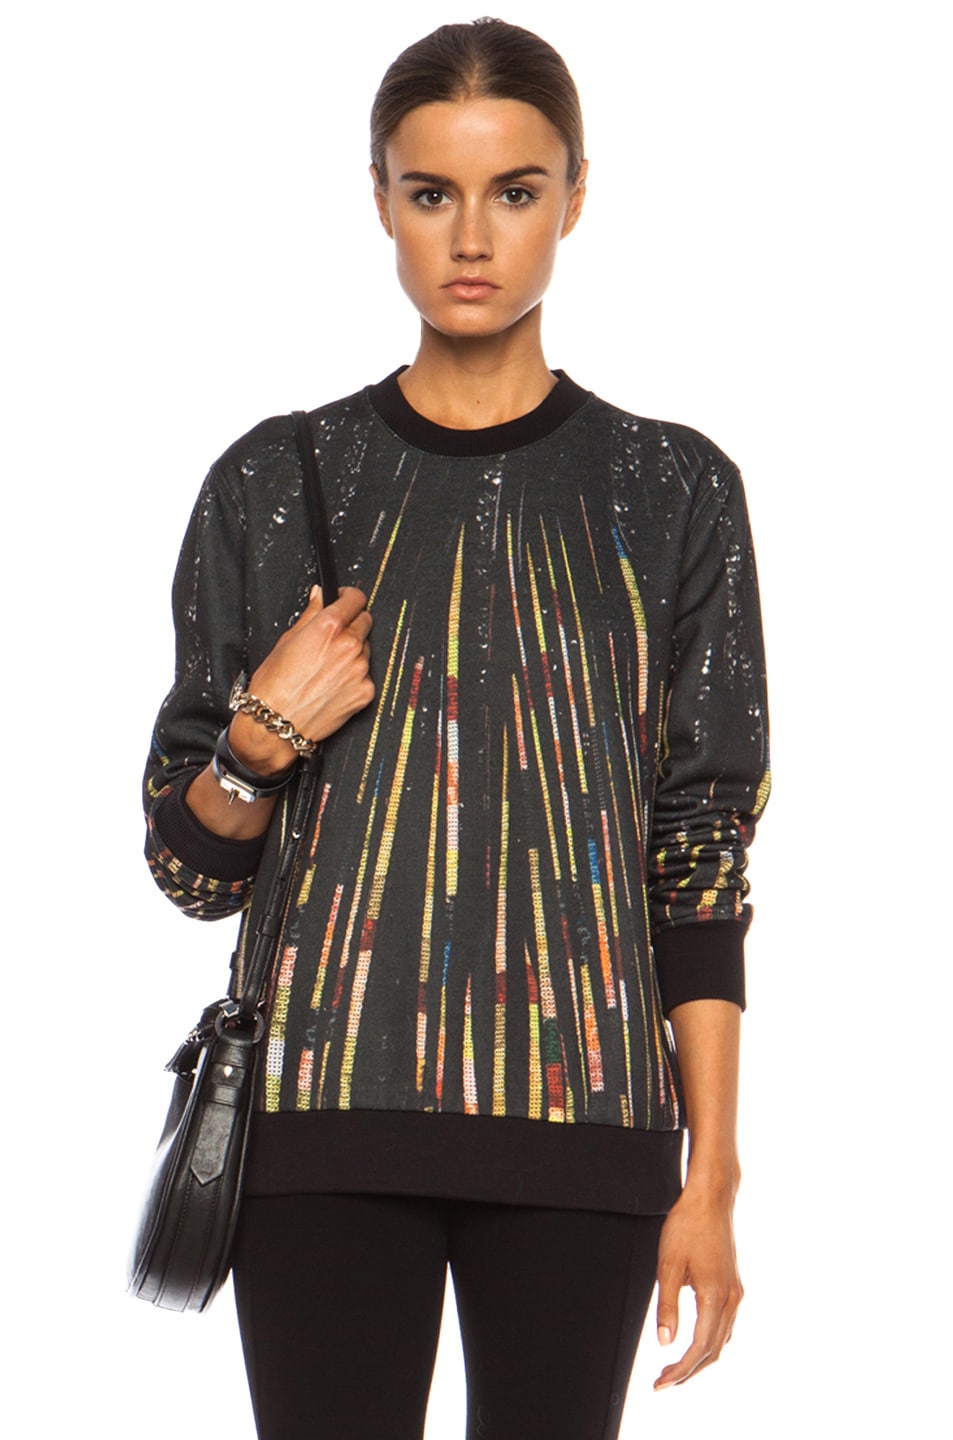 Givenchy Sequin Print Poly-Blend Sweatshirt in Black | FWRD